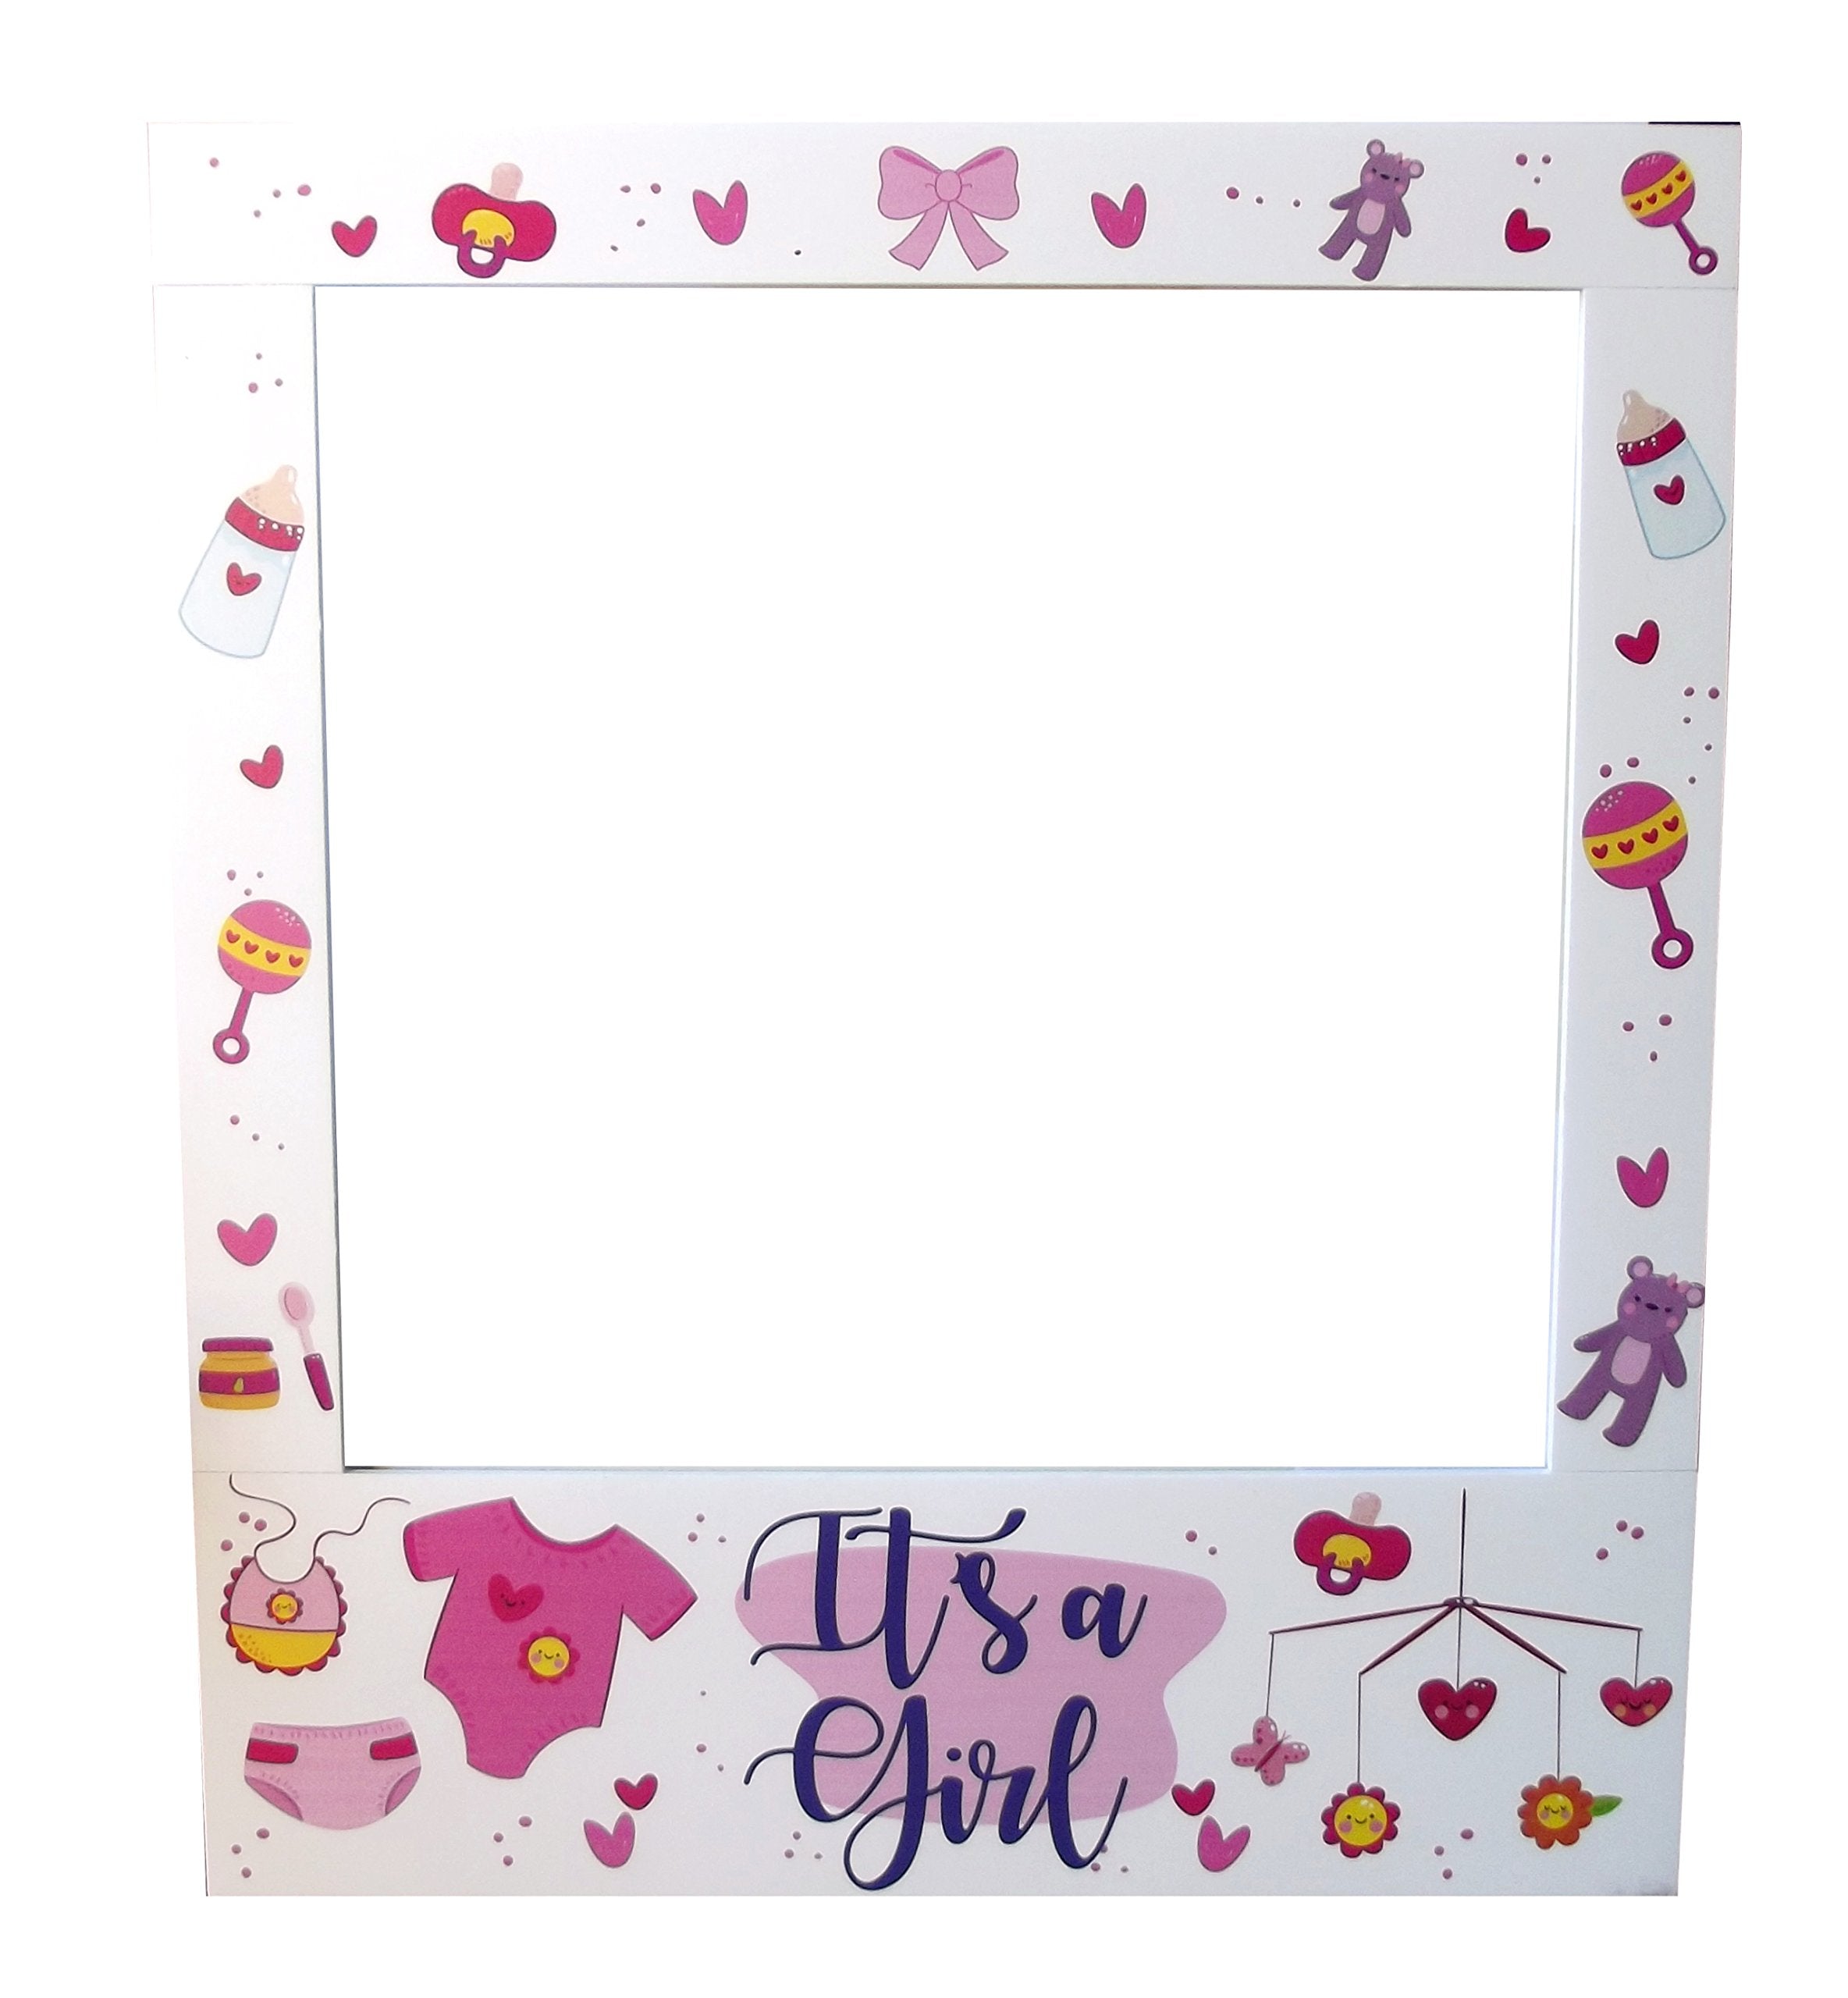 Aahs Engraving Baby Shower Party Frame Photo Prop, 35 X 30 inches (Girl)